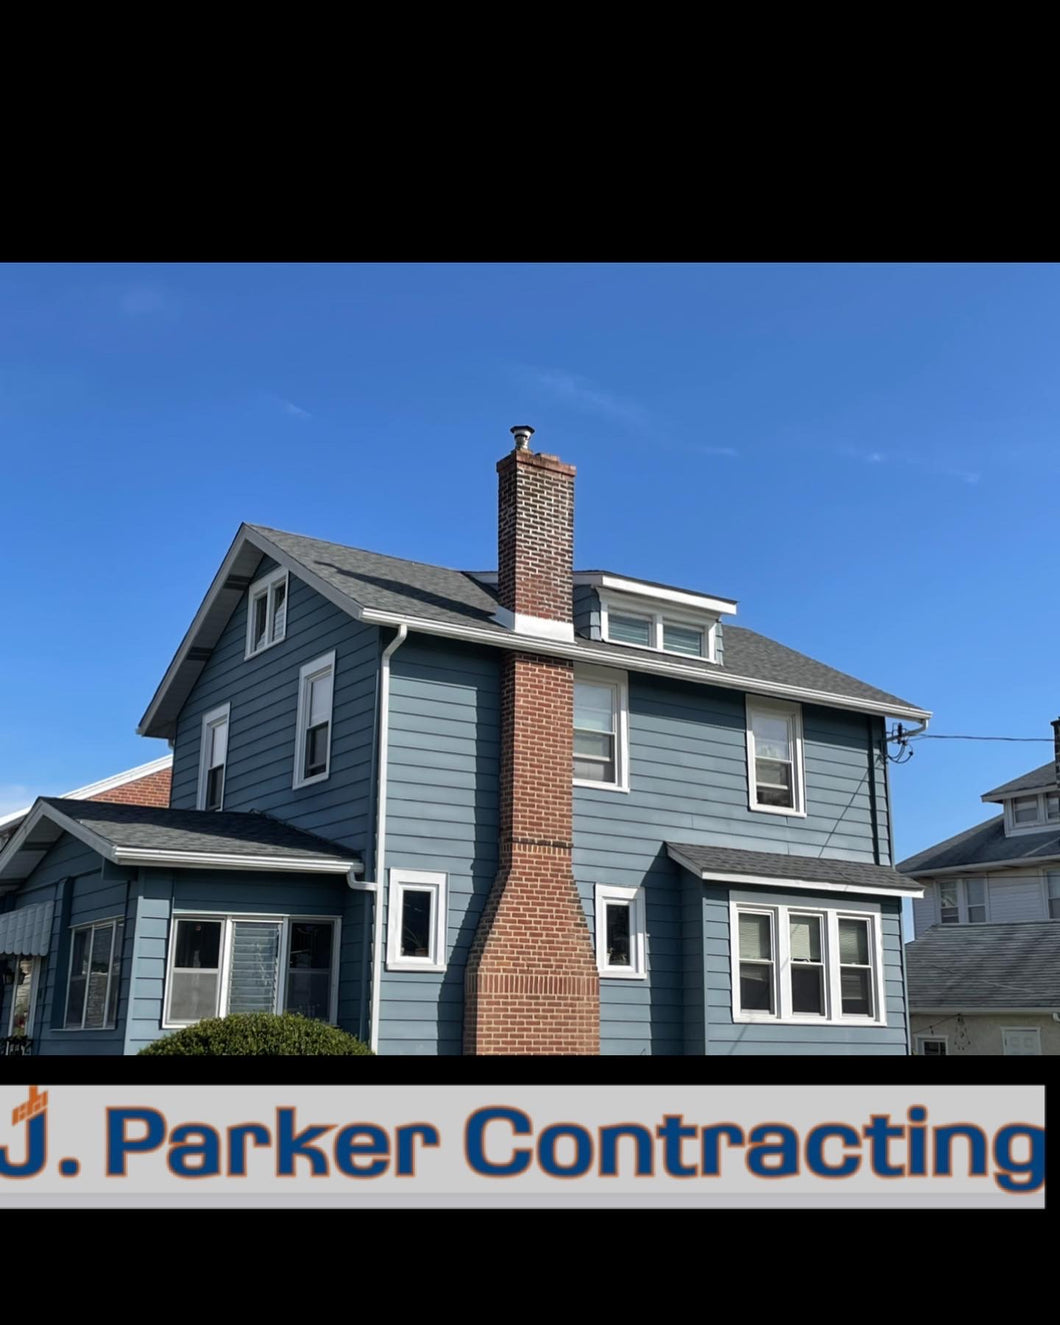 J. Parker Contracting